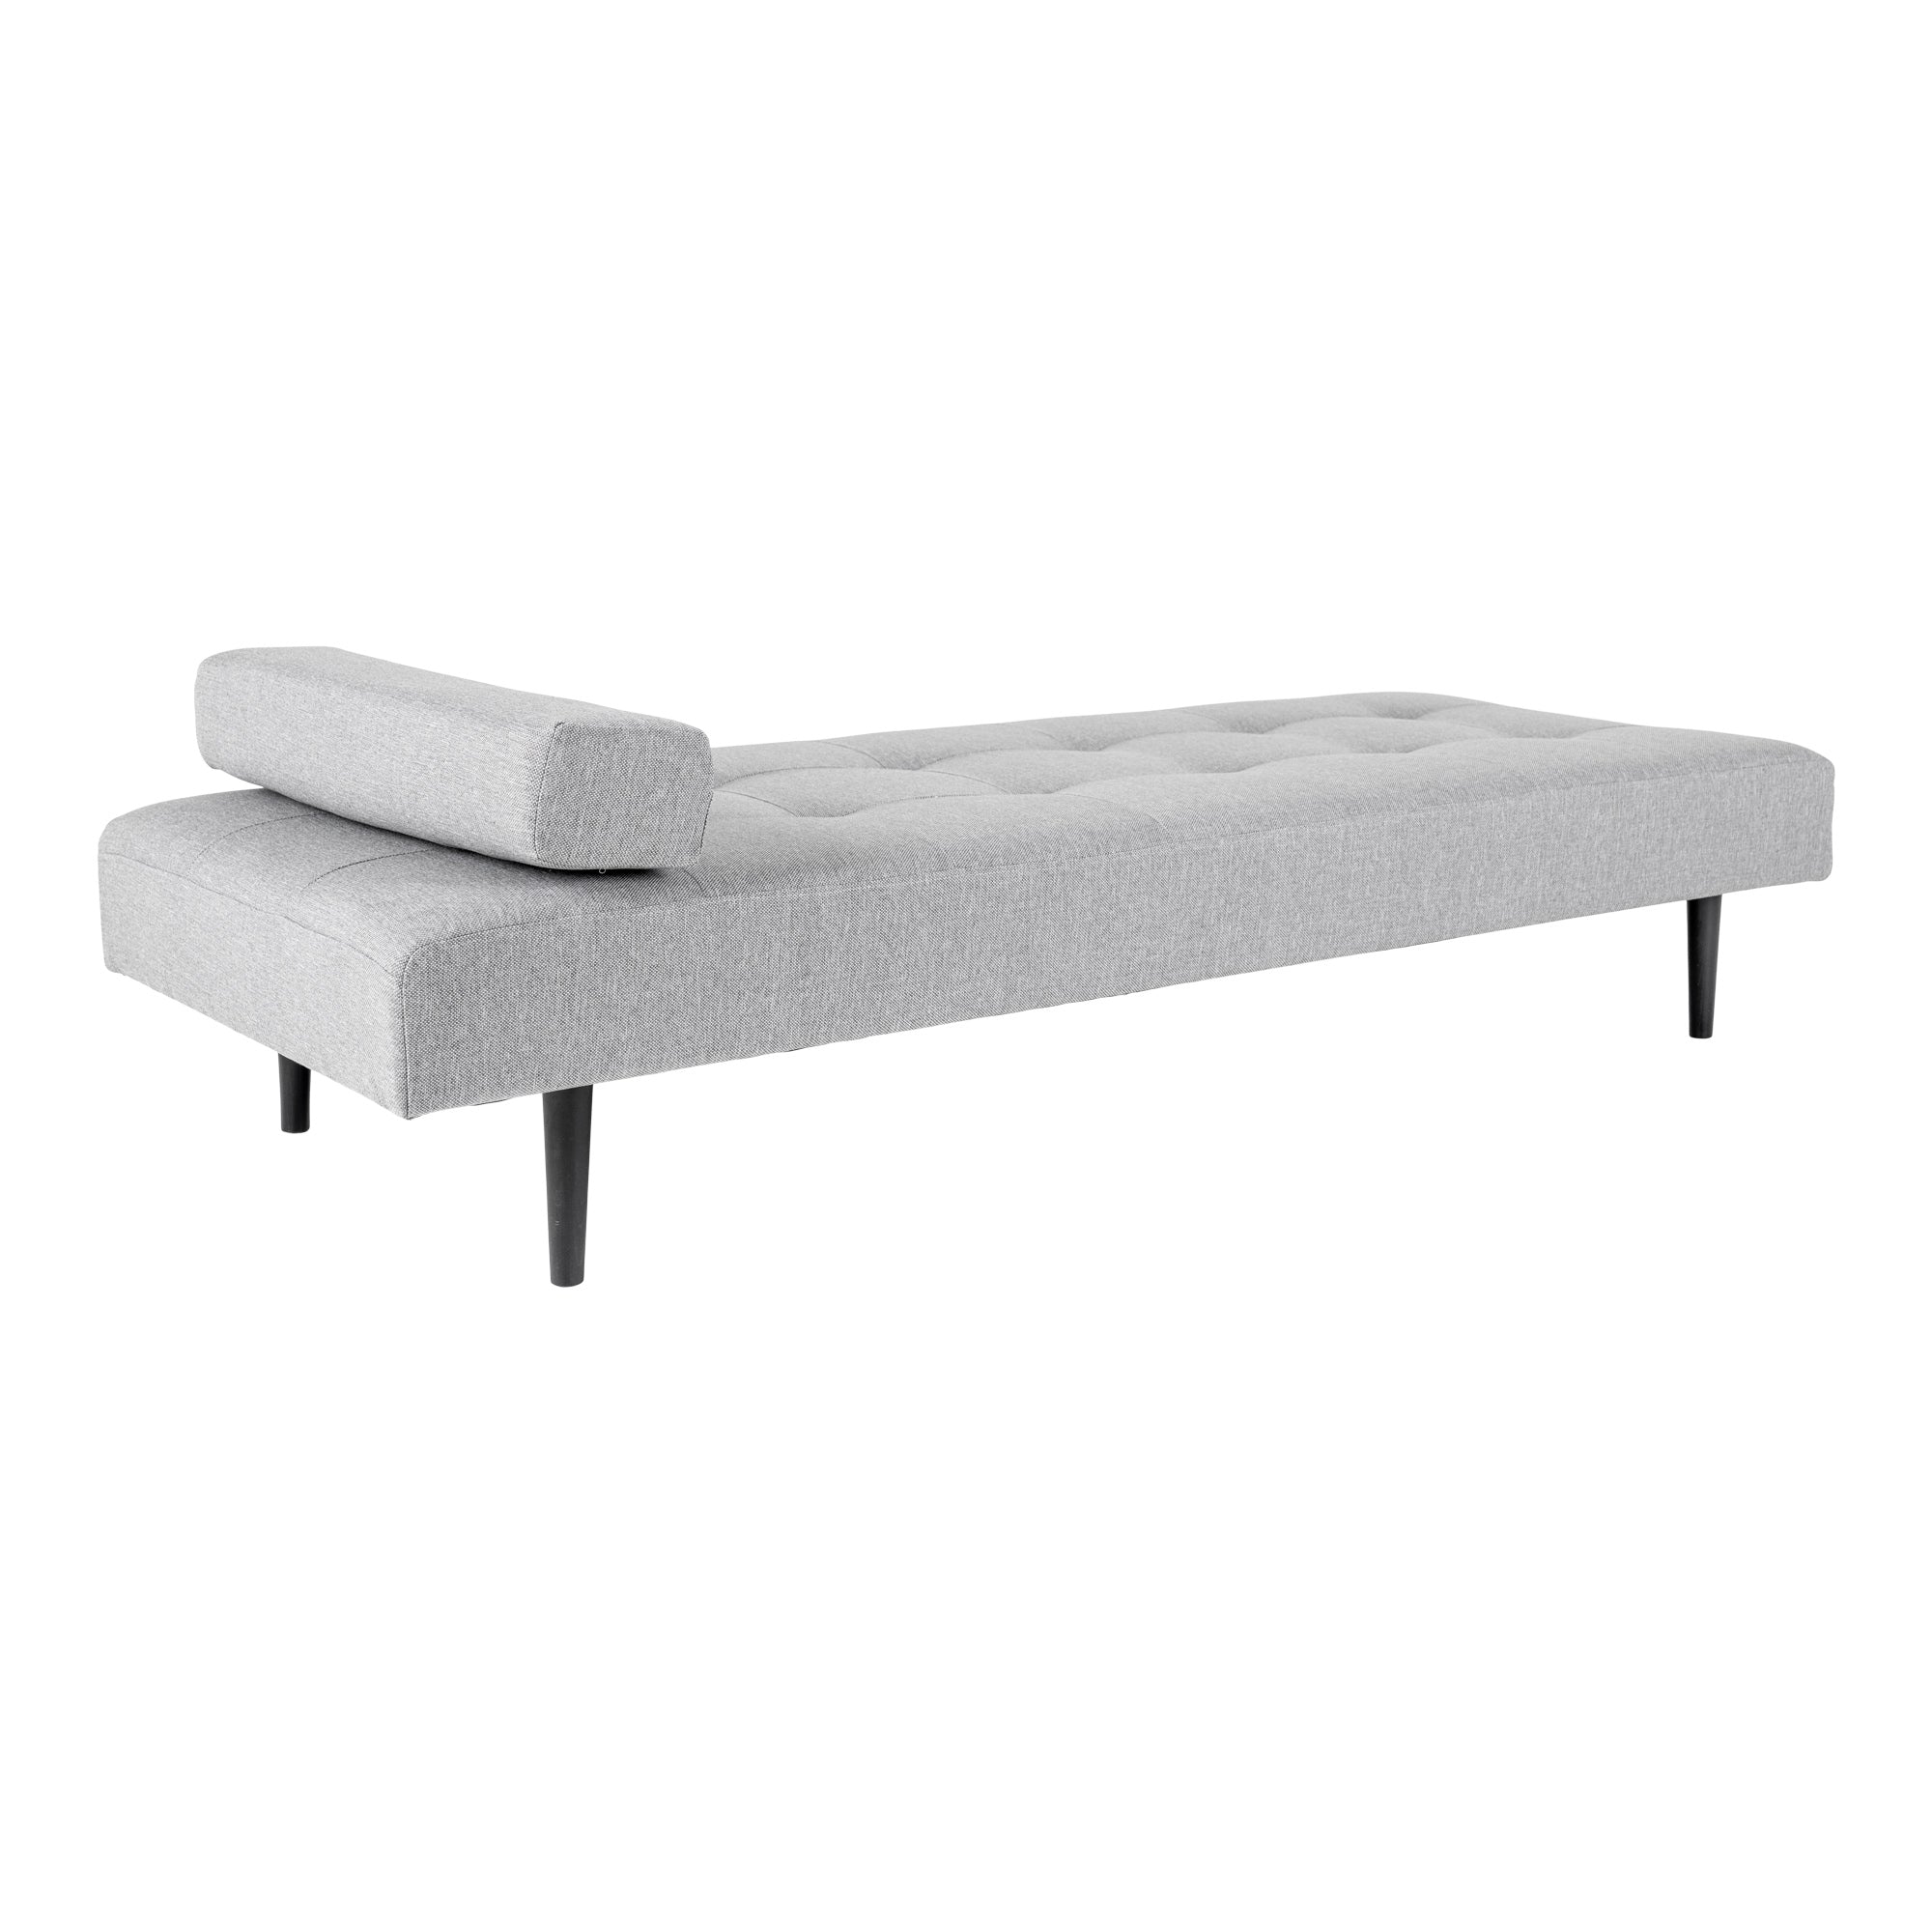 Monza Daybed